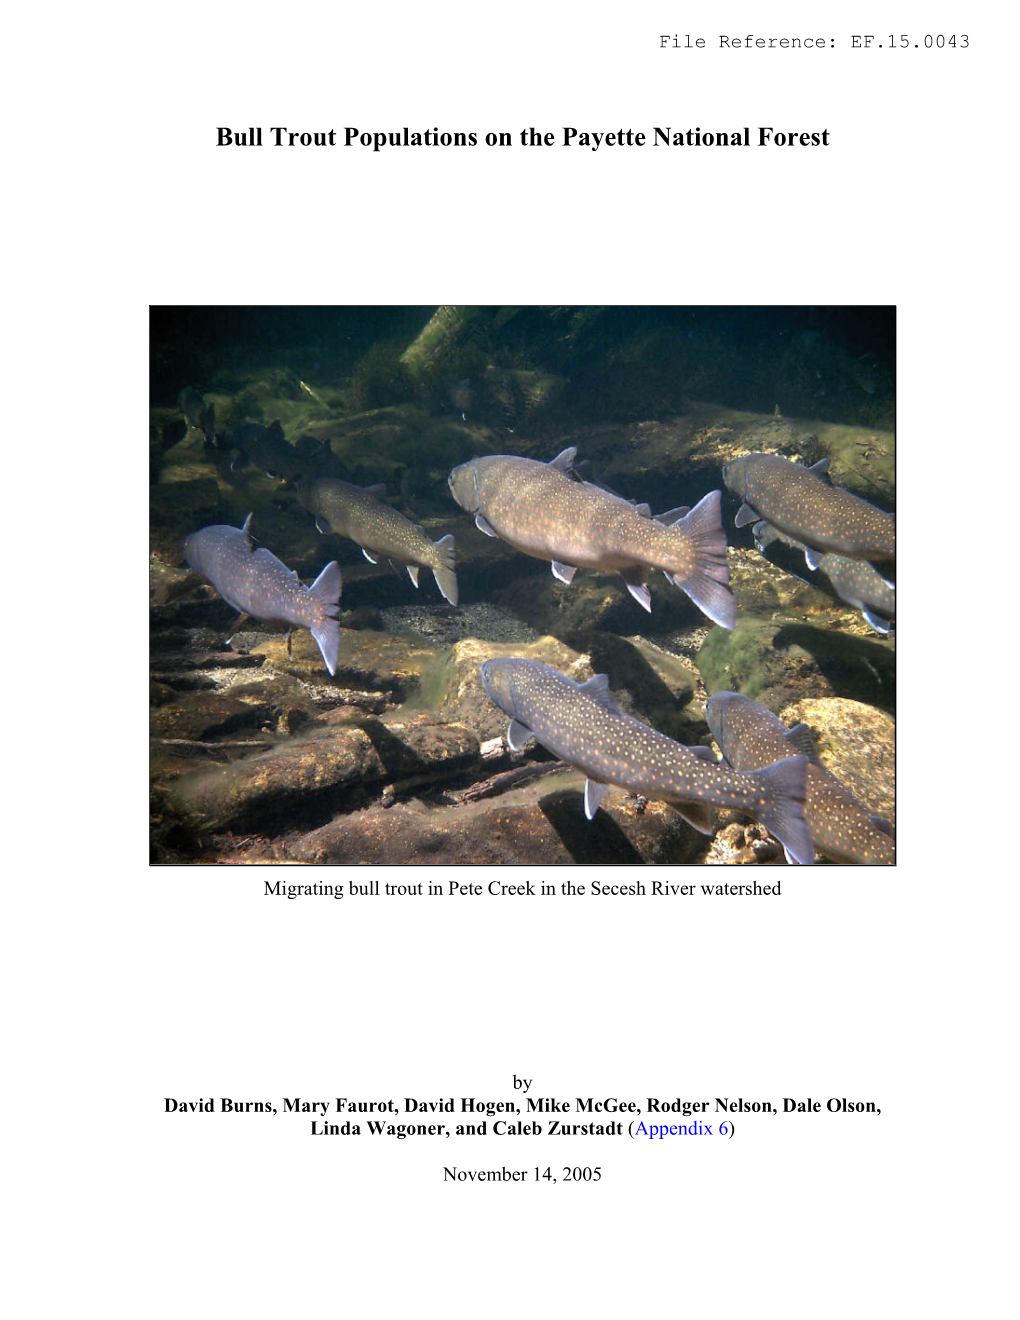 2005 Bull Trout Populations on the Payette National Forest